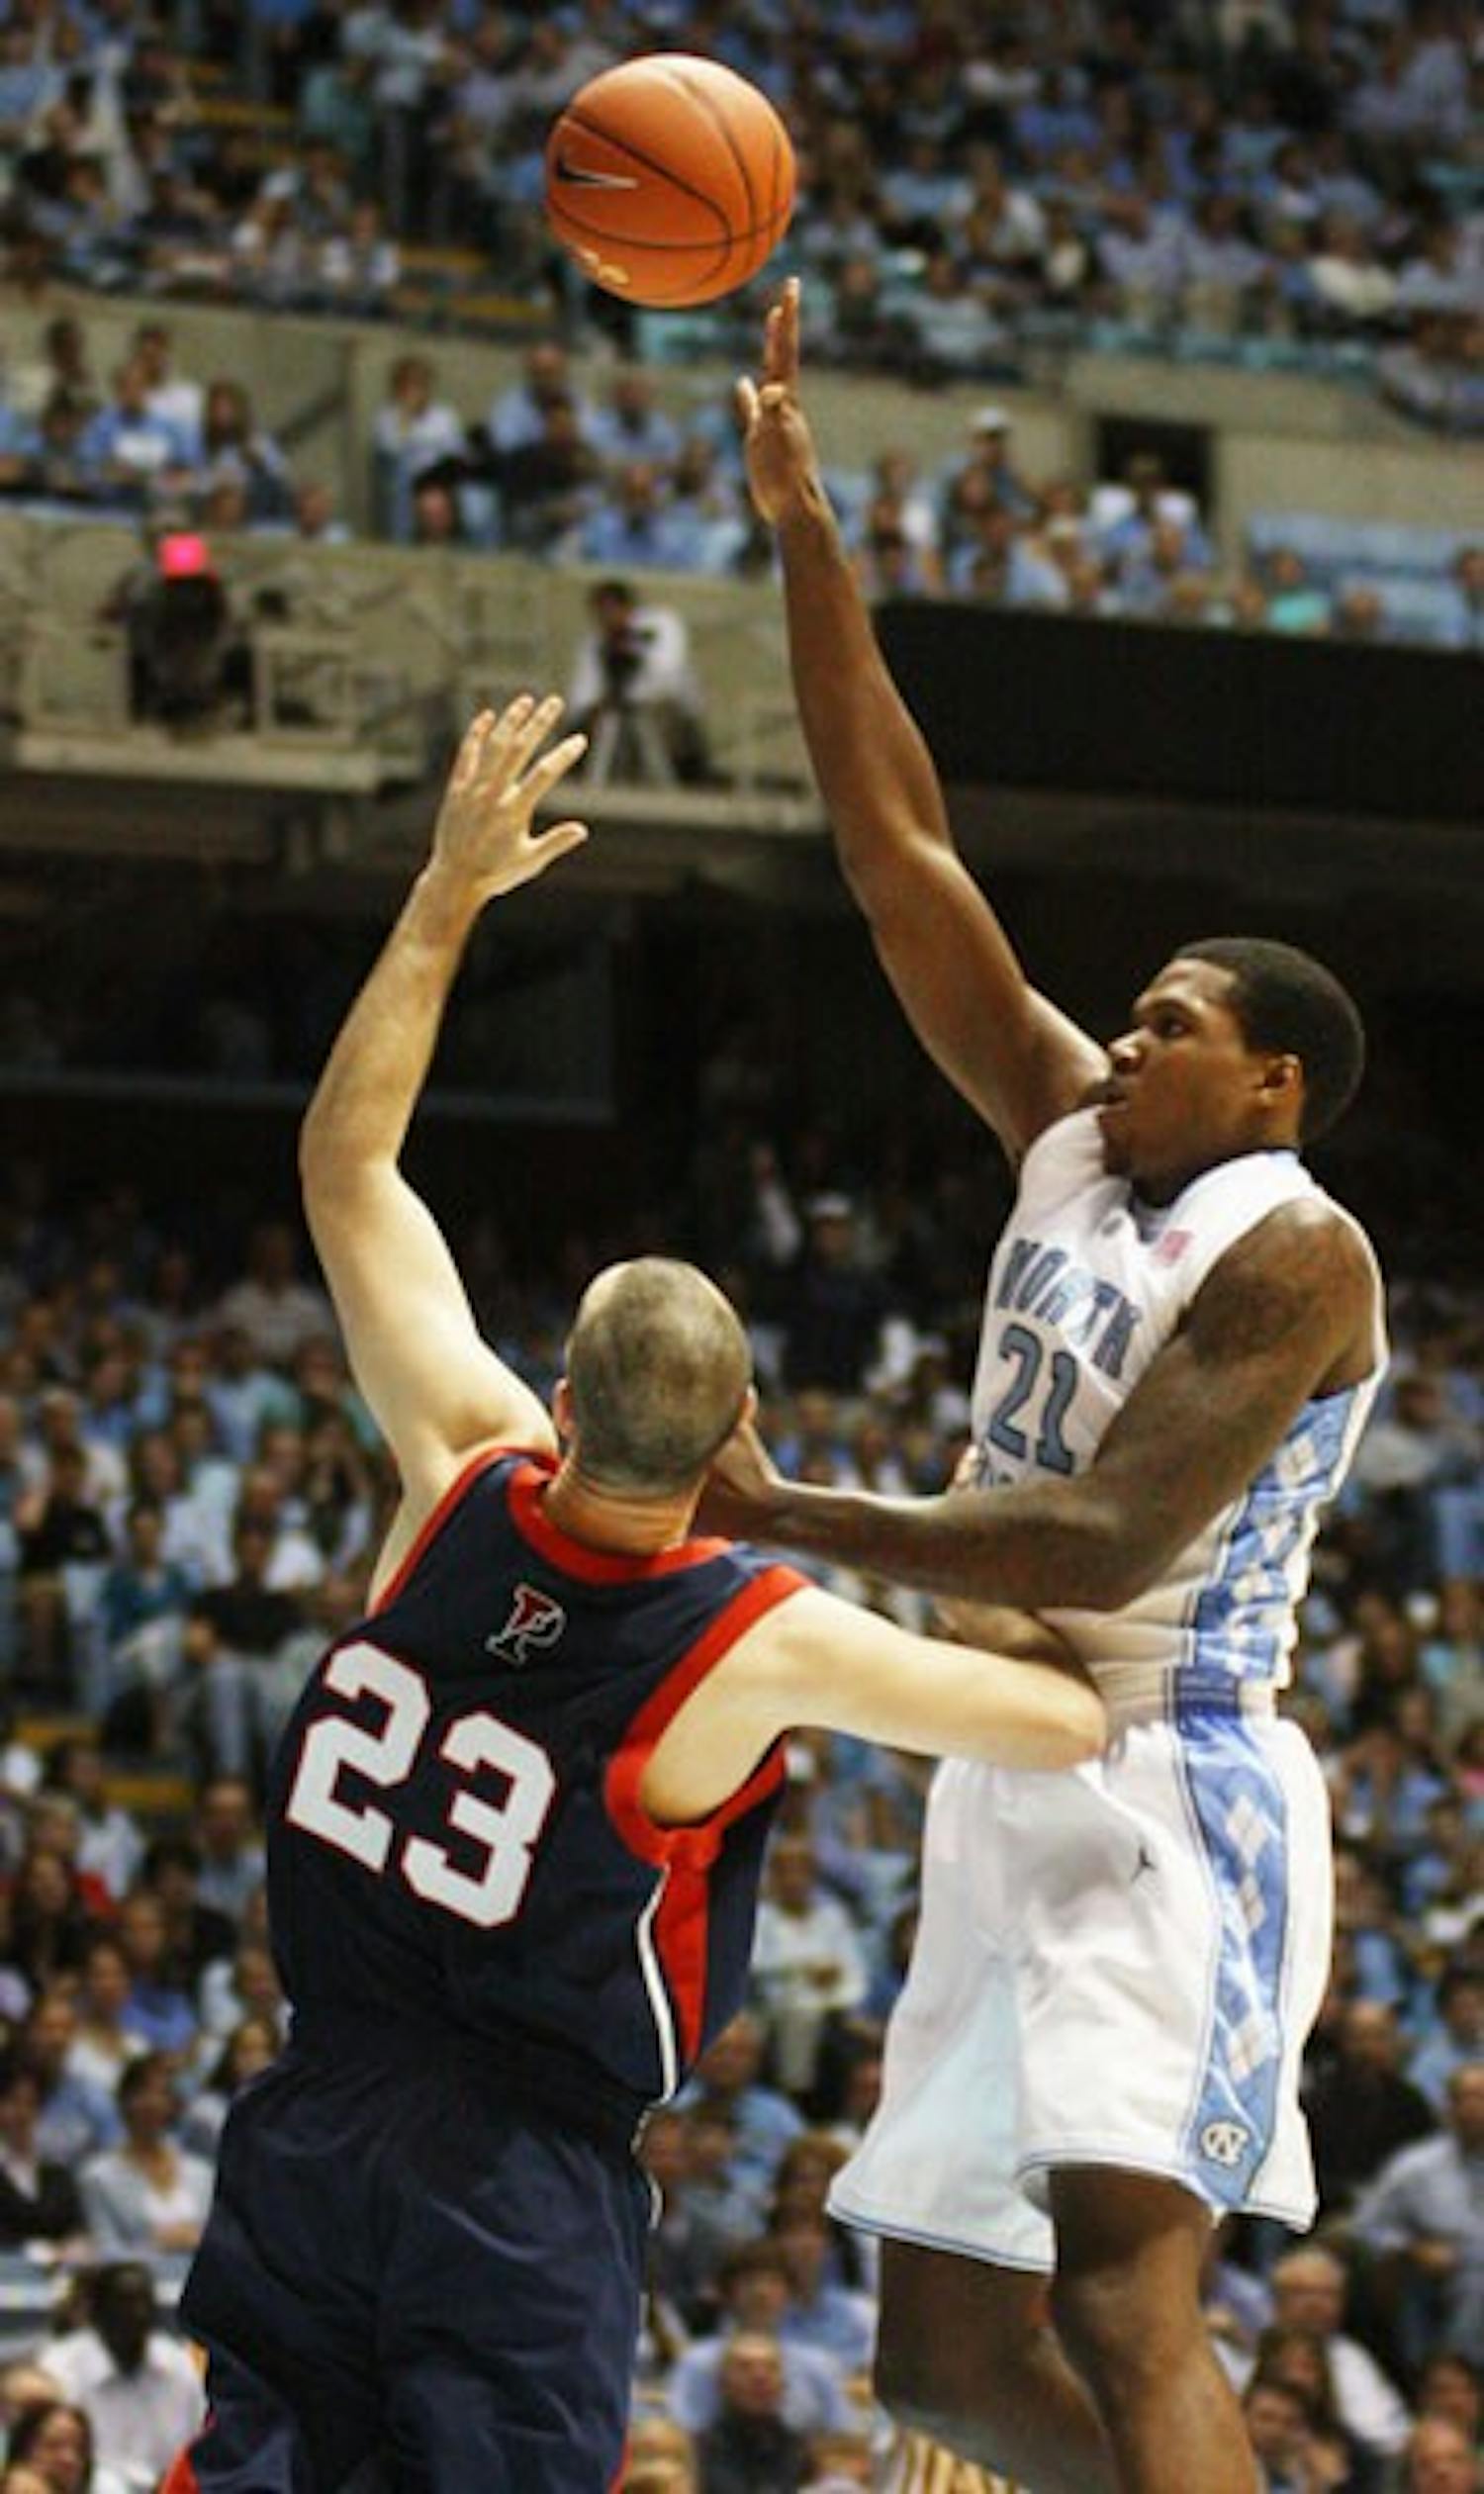 Senior Deon Thompson will help shoulder some of the scoring load left by departing forward Tyler Hansbrough. DTH File Photo